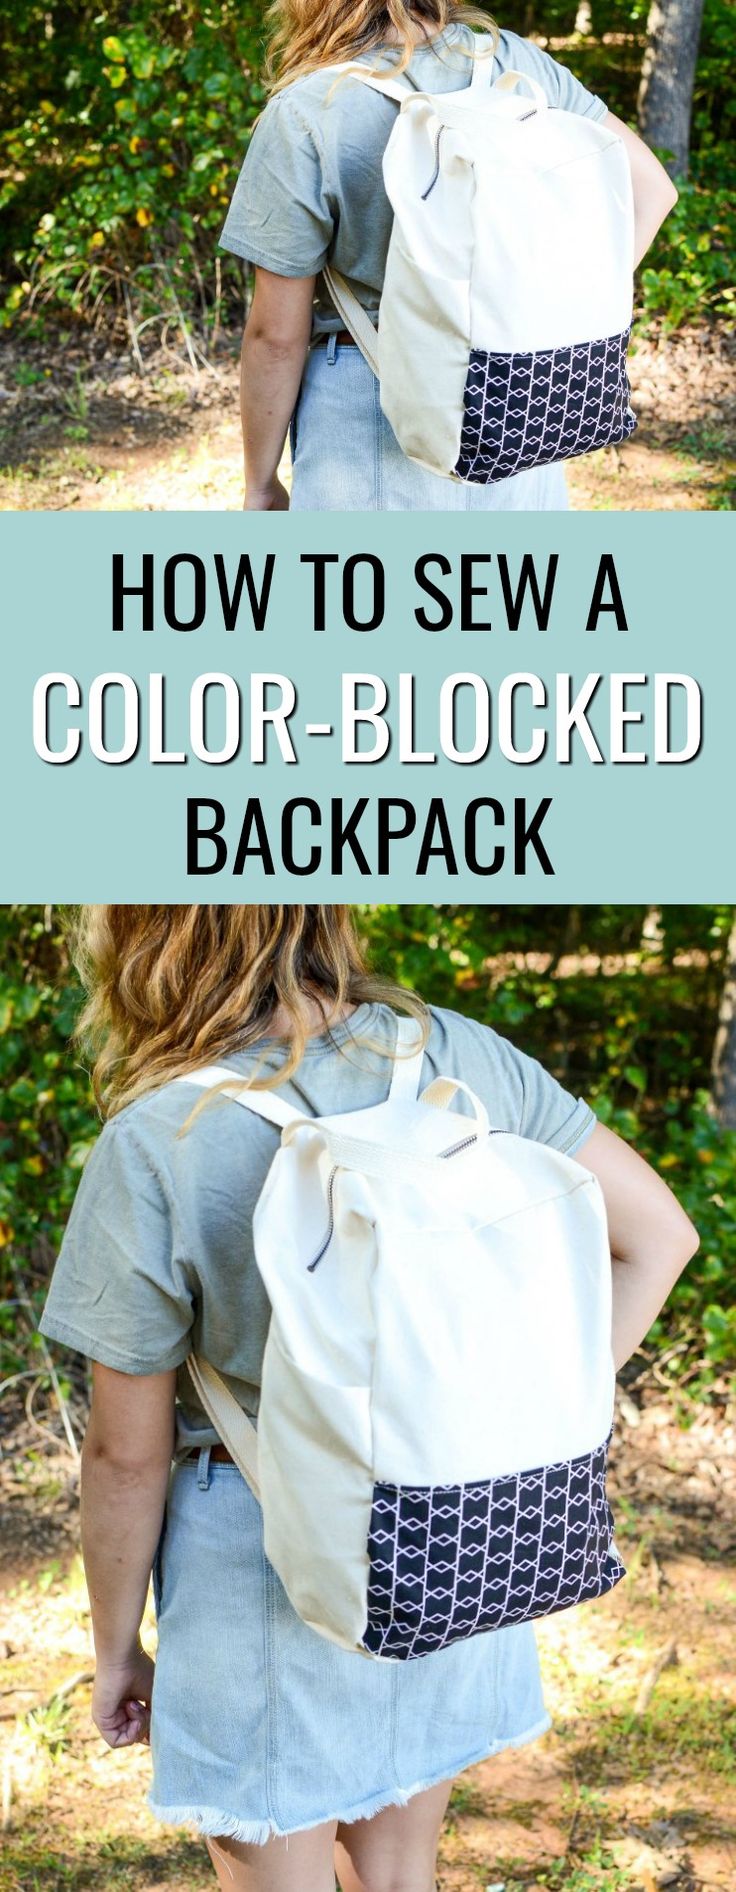 There are quite a few steps to sewing this color-blocked backpack  but don’t g...